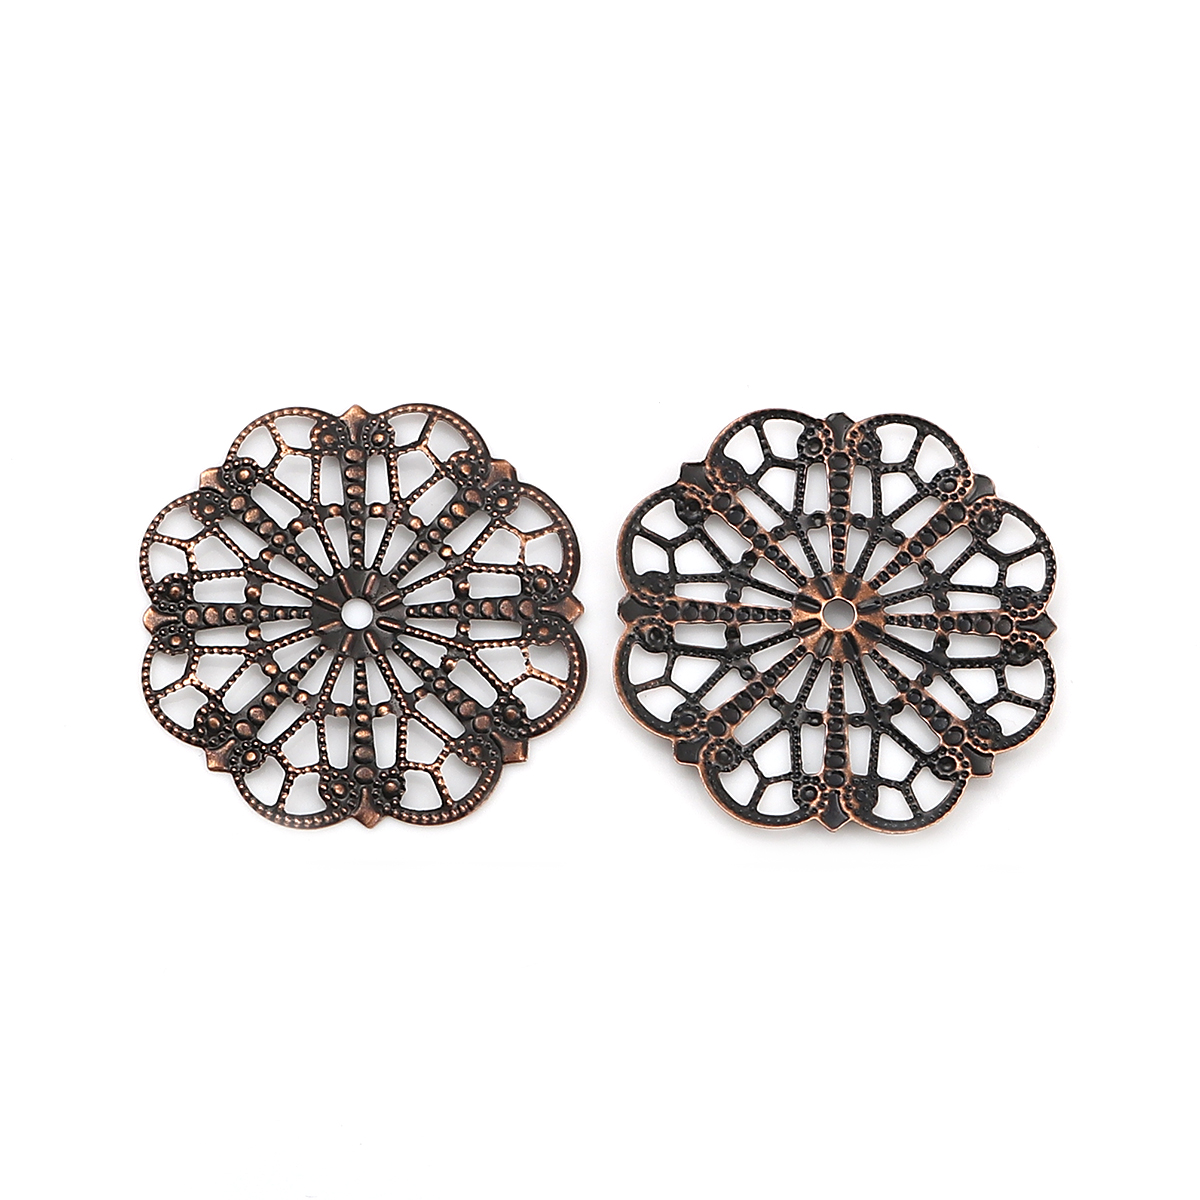 Picture of Iron Based Alloy Filigree Stamping Embellishments Flower Antique Copper 41mm(1 5/8") x 41mm(1 5/8"), 50 PCs